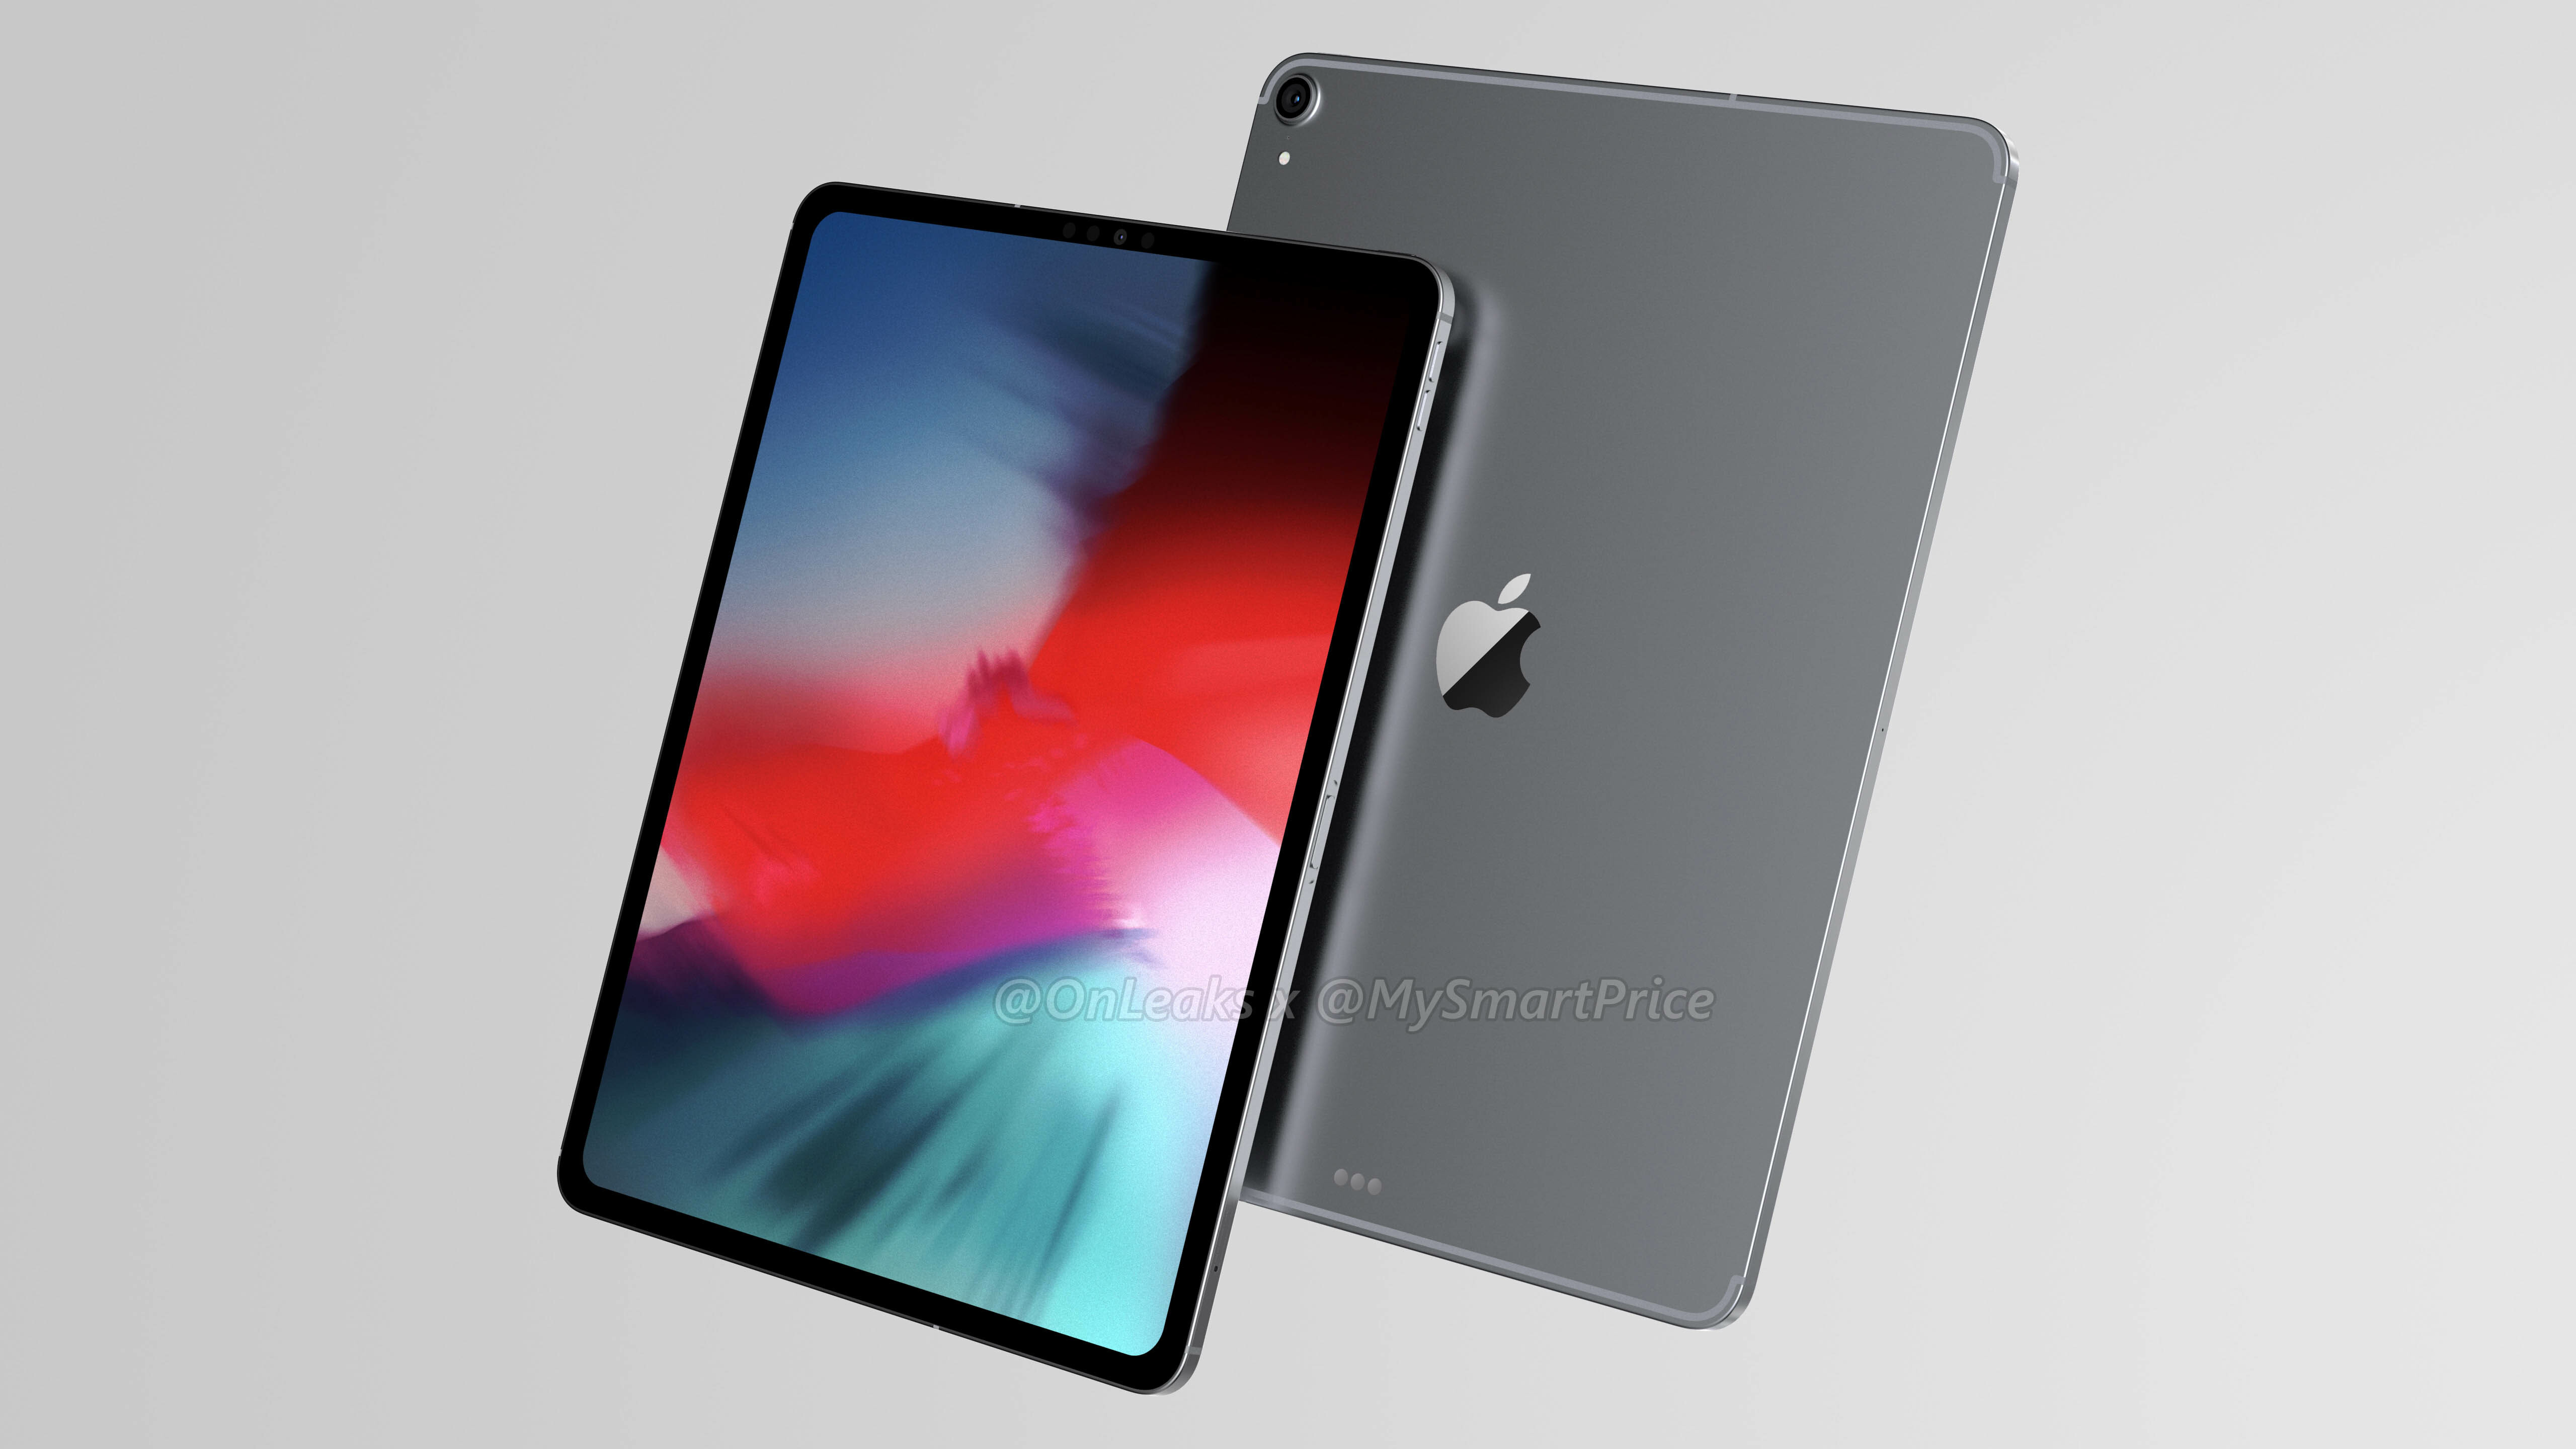 Is there anything else I should know about the Apple iPad Pro (2018)?